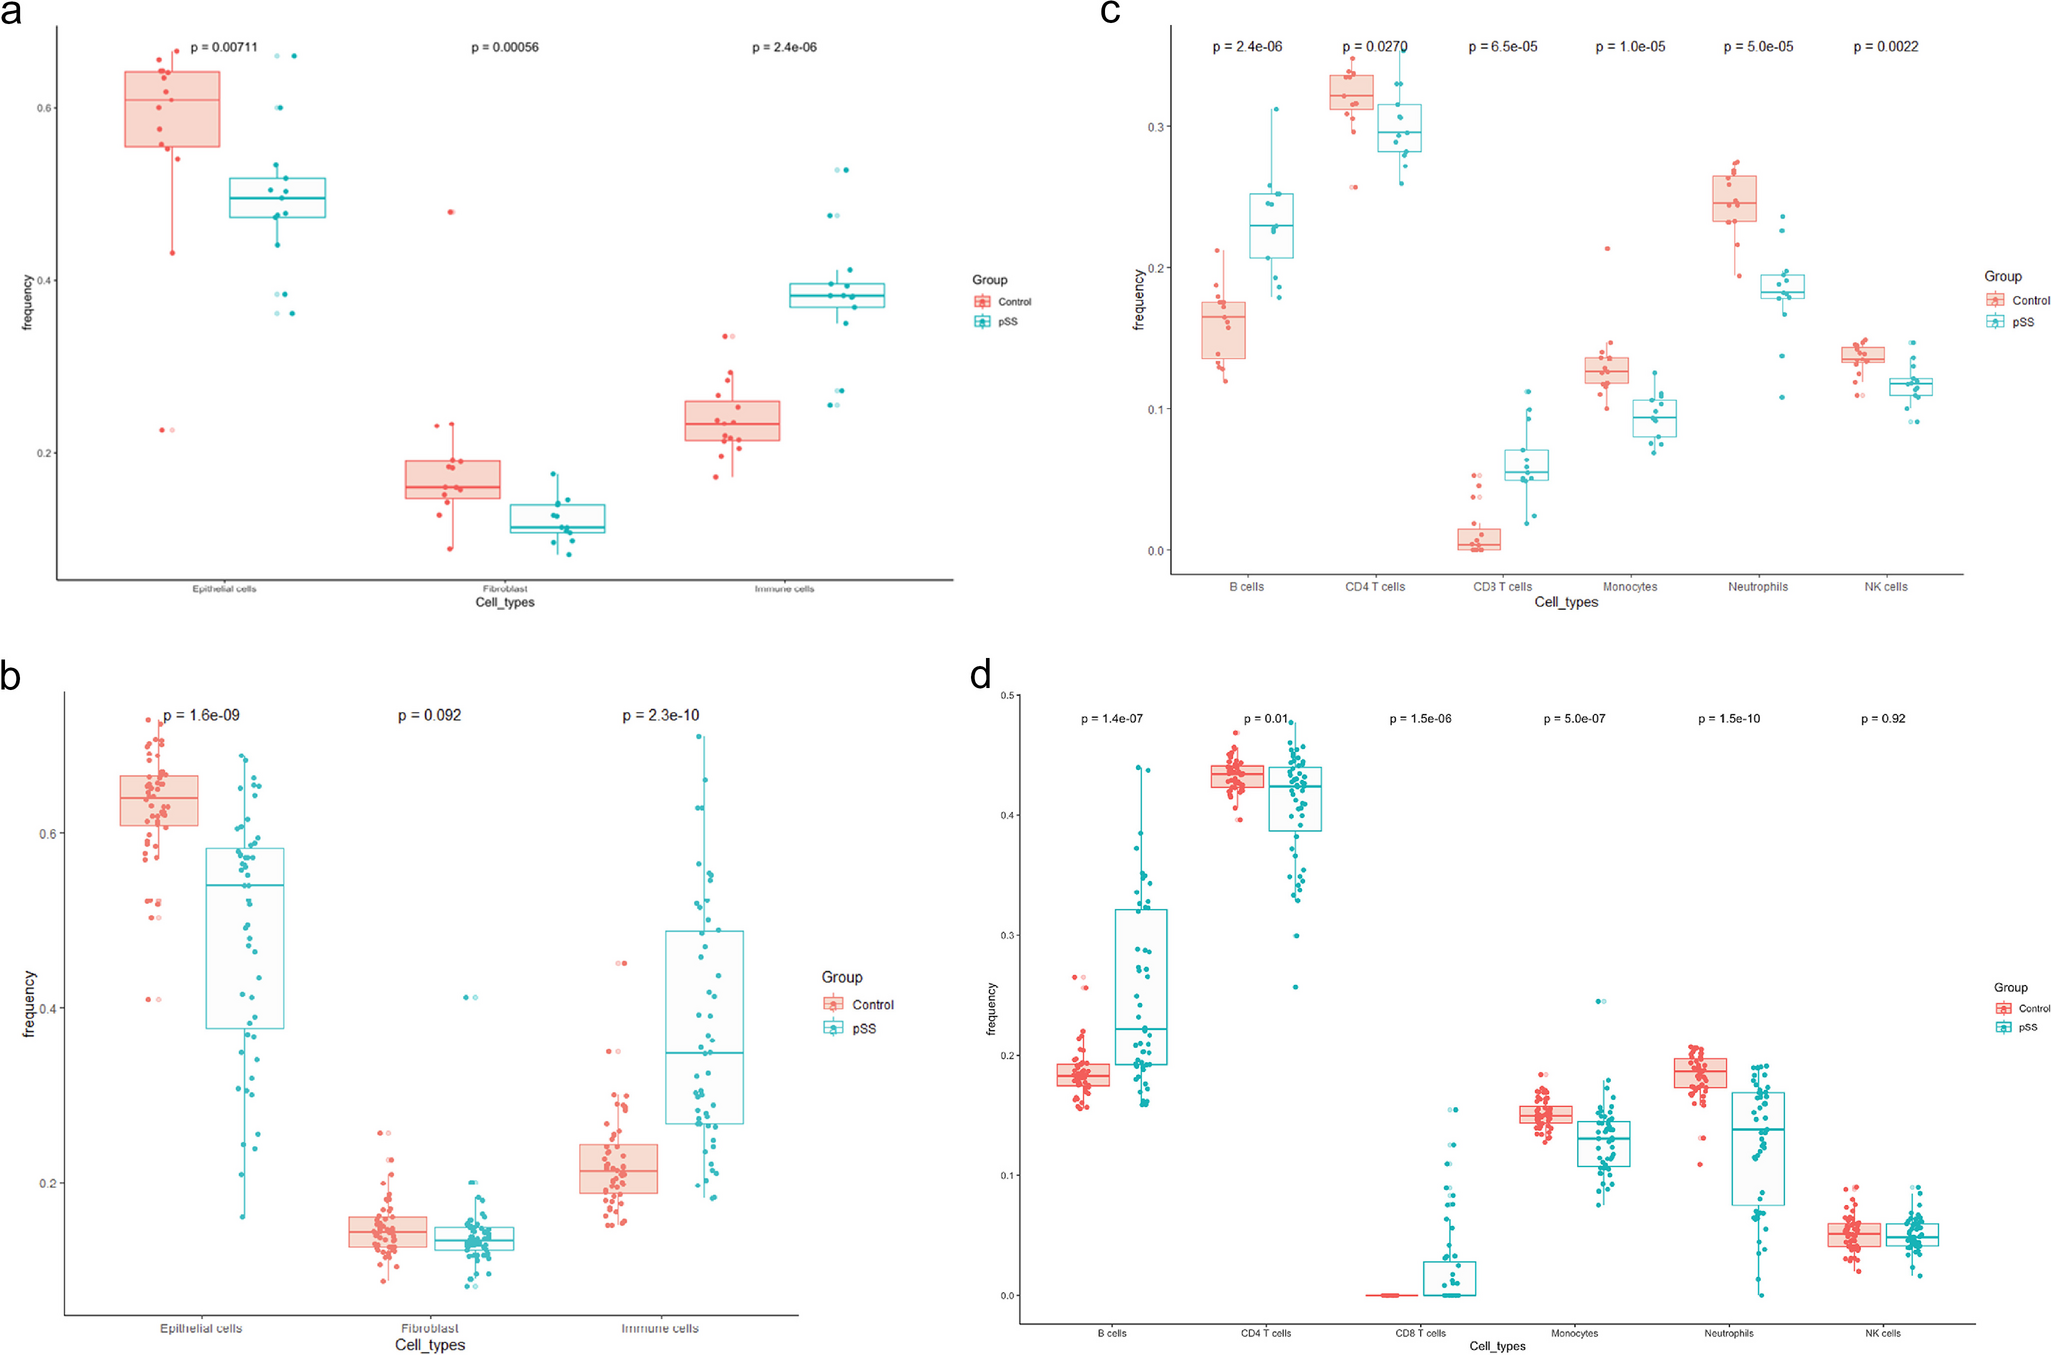 DNA methylation profiling of labial salivary gland tissues revealed hypomethylation of B-cell-related genes in primary Sjögren’s syndrome